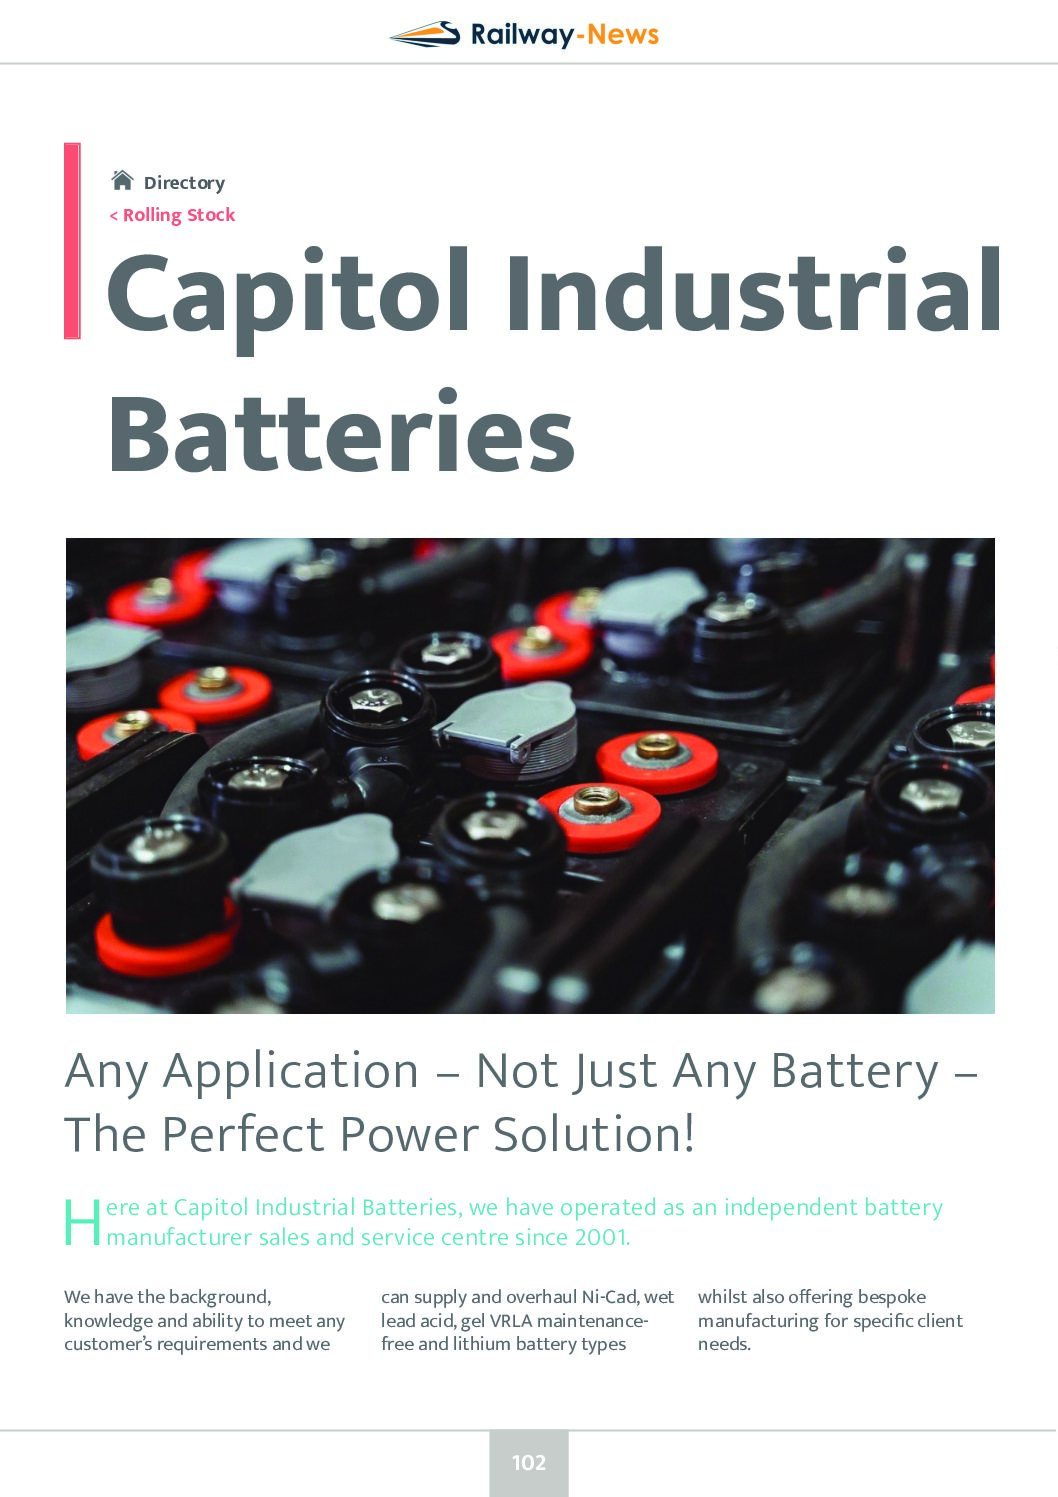 Any Railway Application – Not Just Any Battery – The Perfect Power Solution